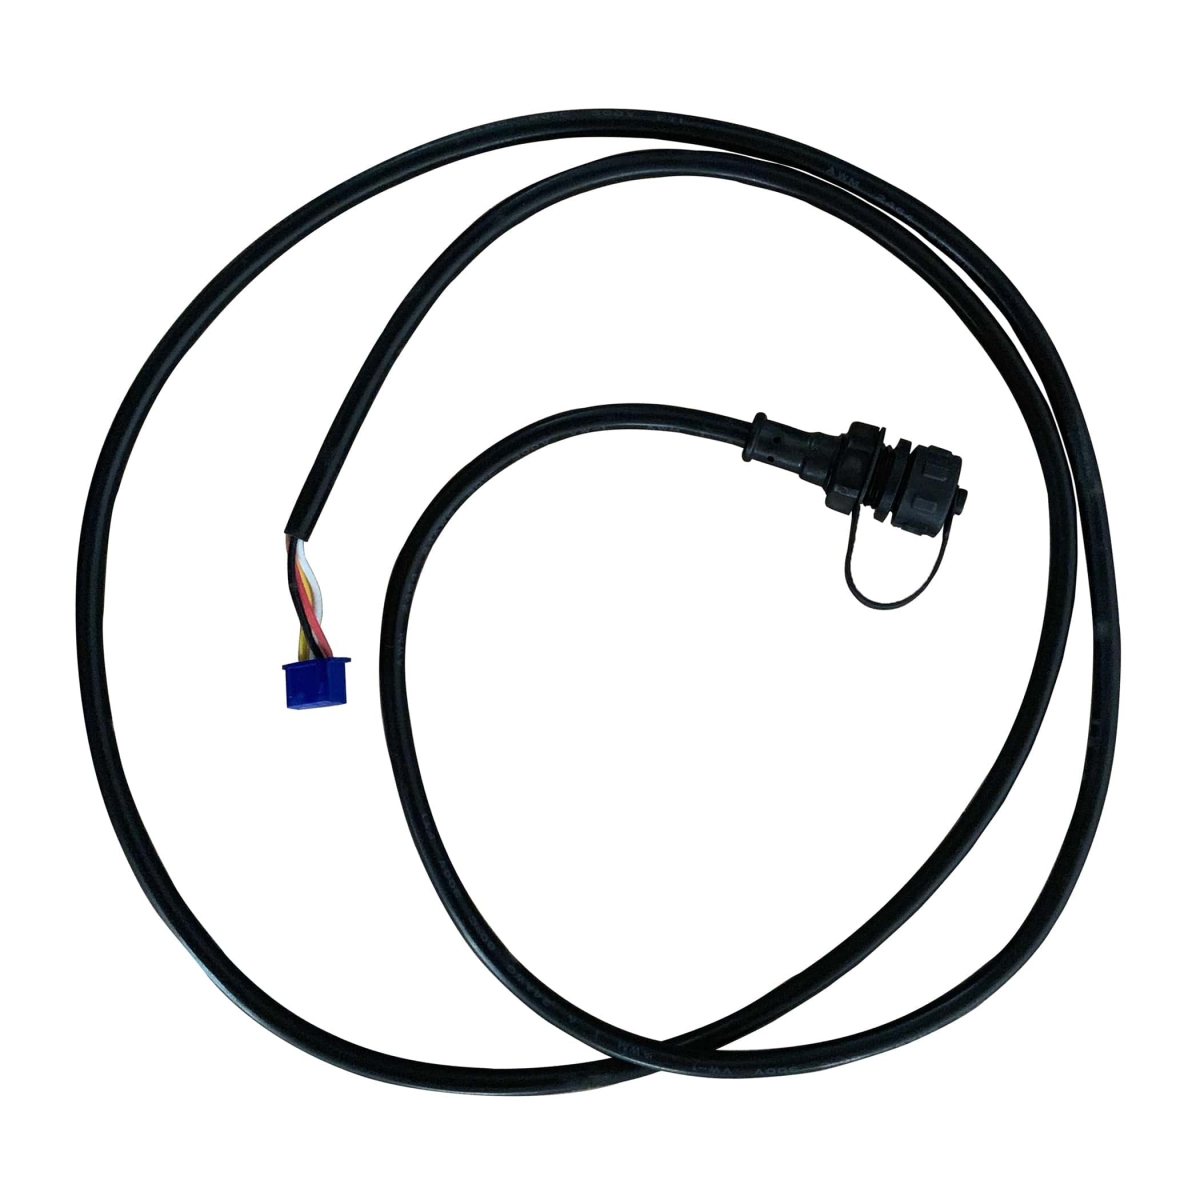 Connection cable BCP to round plug for Modbus connection 1.2 m Connection cable BCP to round plug for Modbus connection 1.2 m